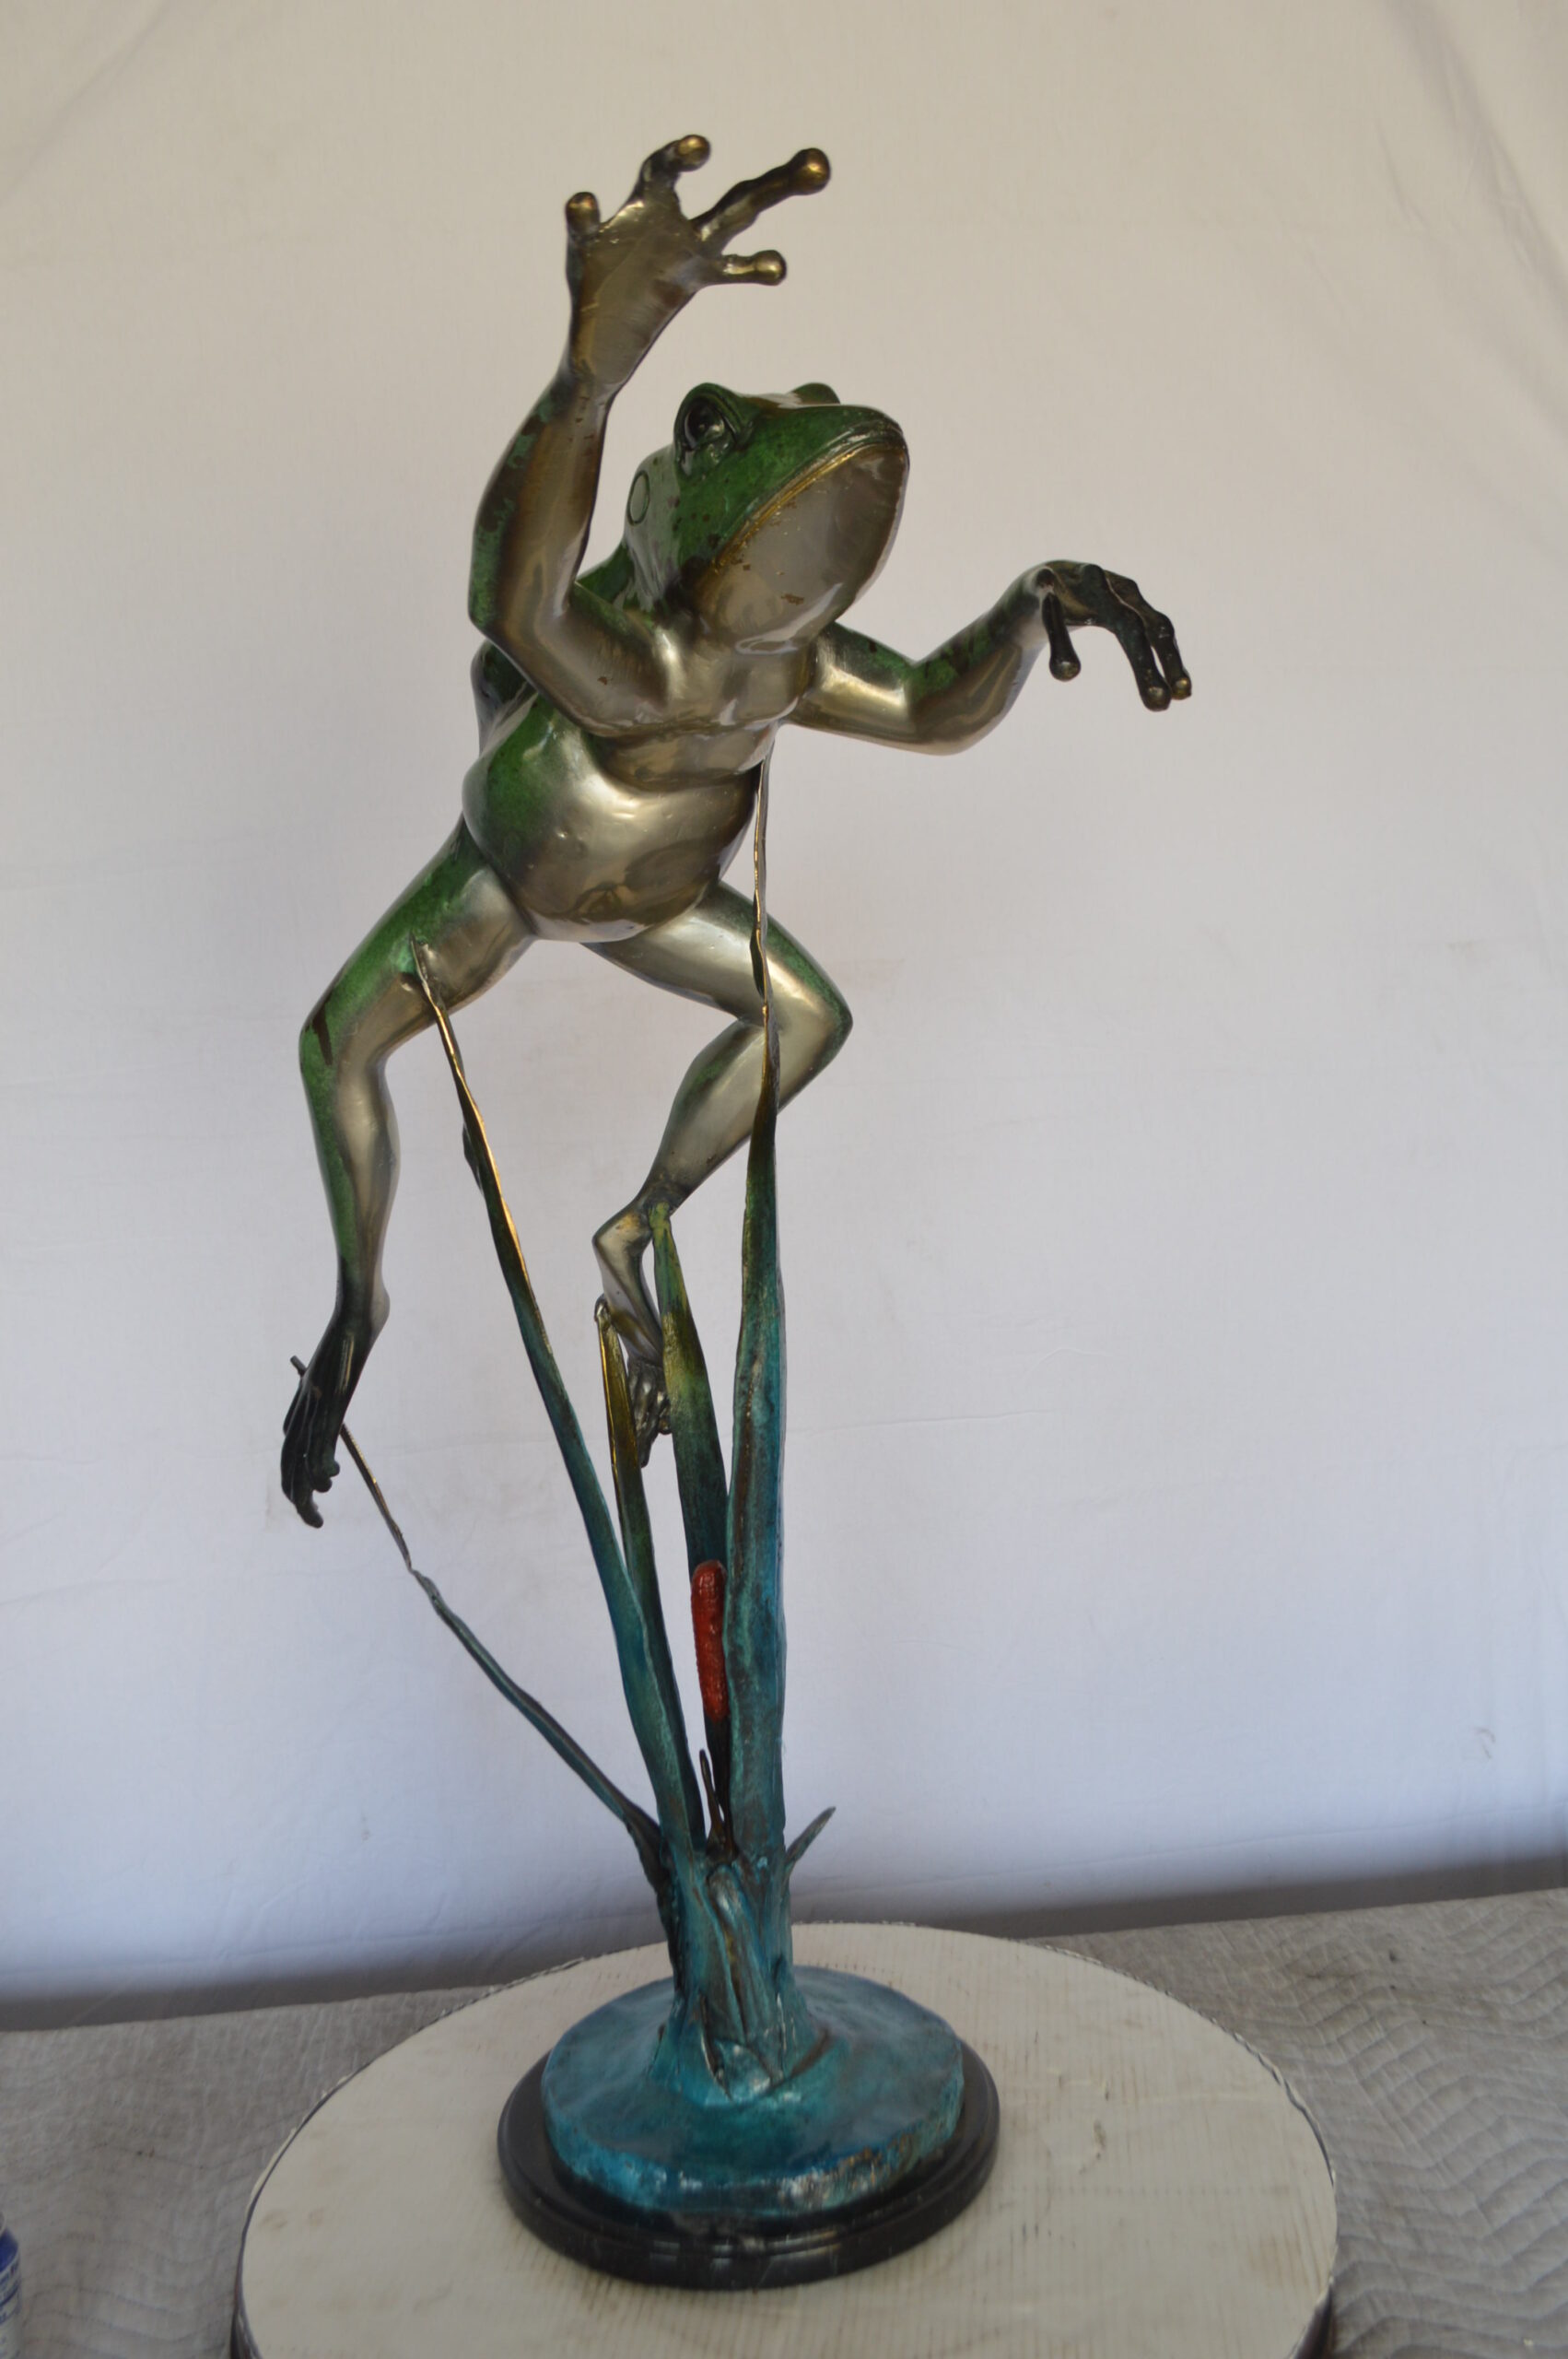 Large Frog Jumping Forward Bronze Statue on Marble - Size: 25L x 15W x  36H. - NiFAO